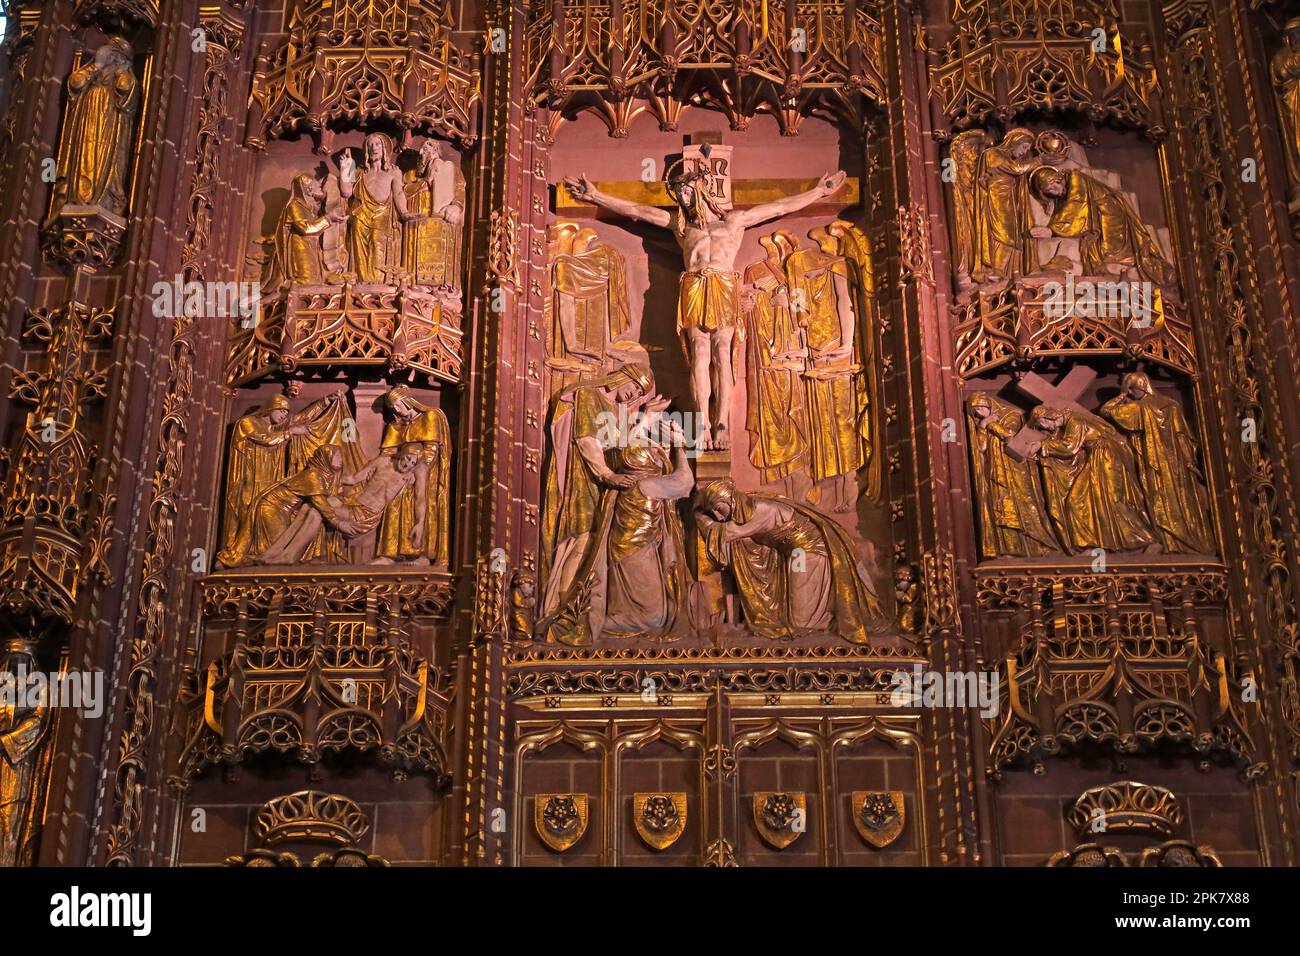 High altar, and Reredos at the Anglican Cathedral interior, St James Mt, St James Road, Liverpool , Merseyside, England, UK, L1 7AZ Stock Photo